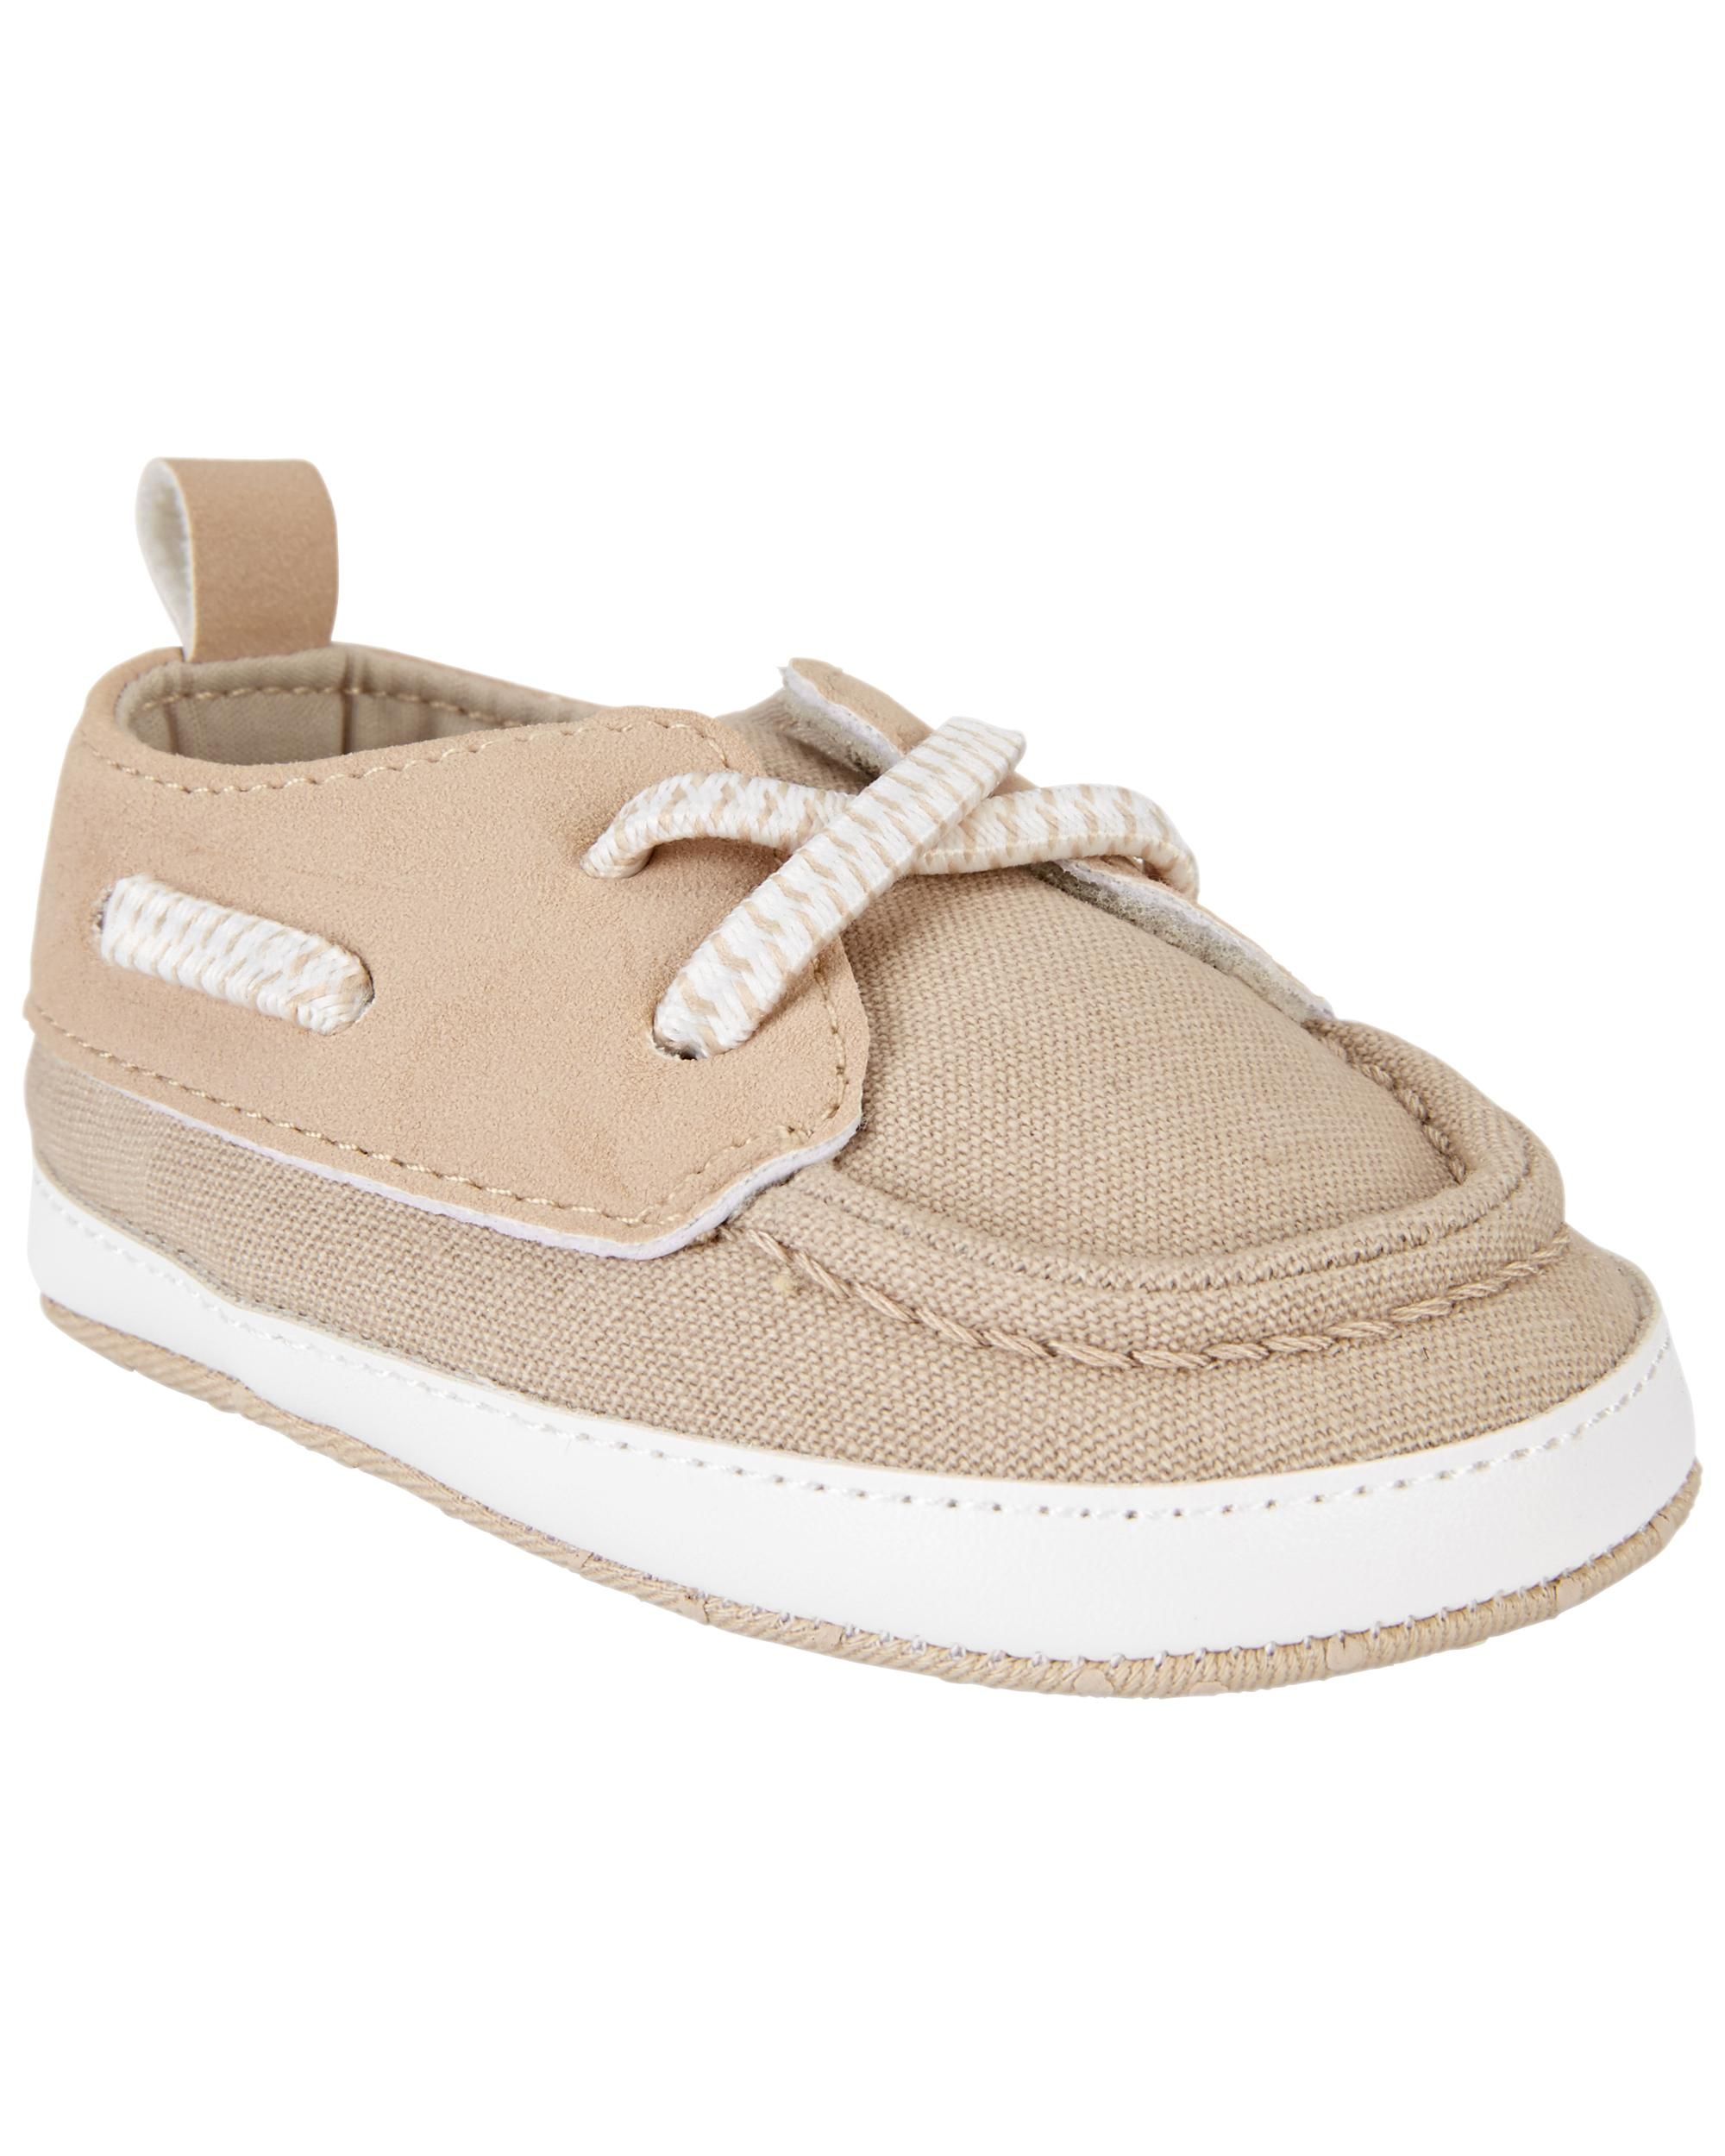 Khaki Baby Boat Baby Shoes | carters.com | Carter's